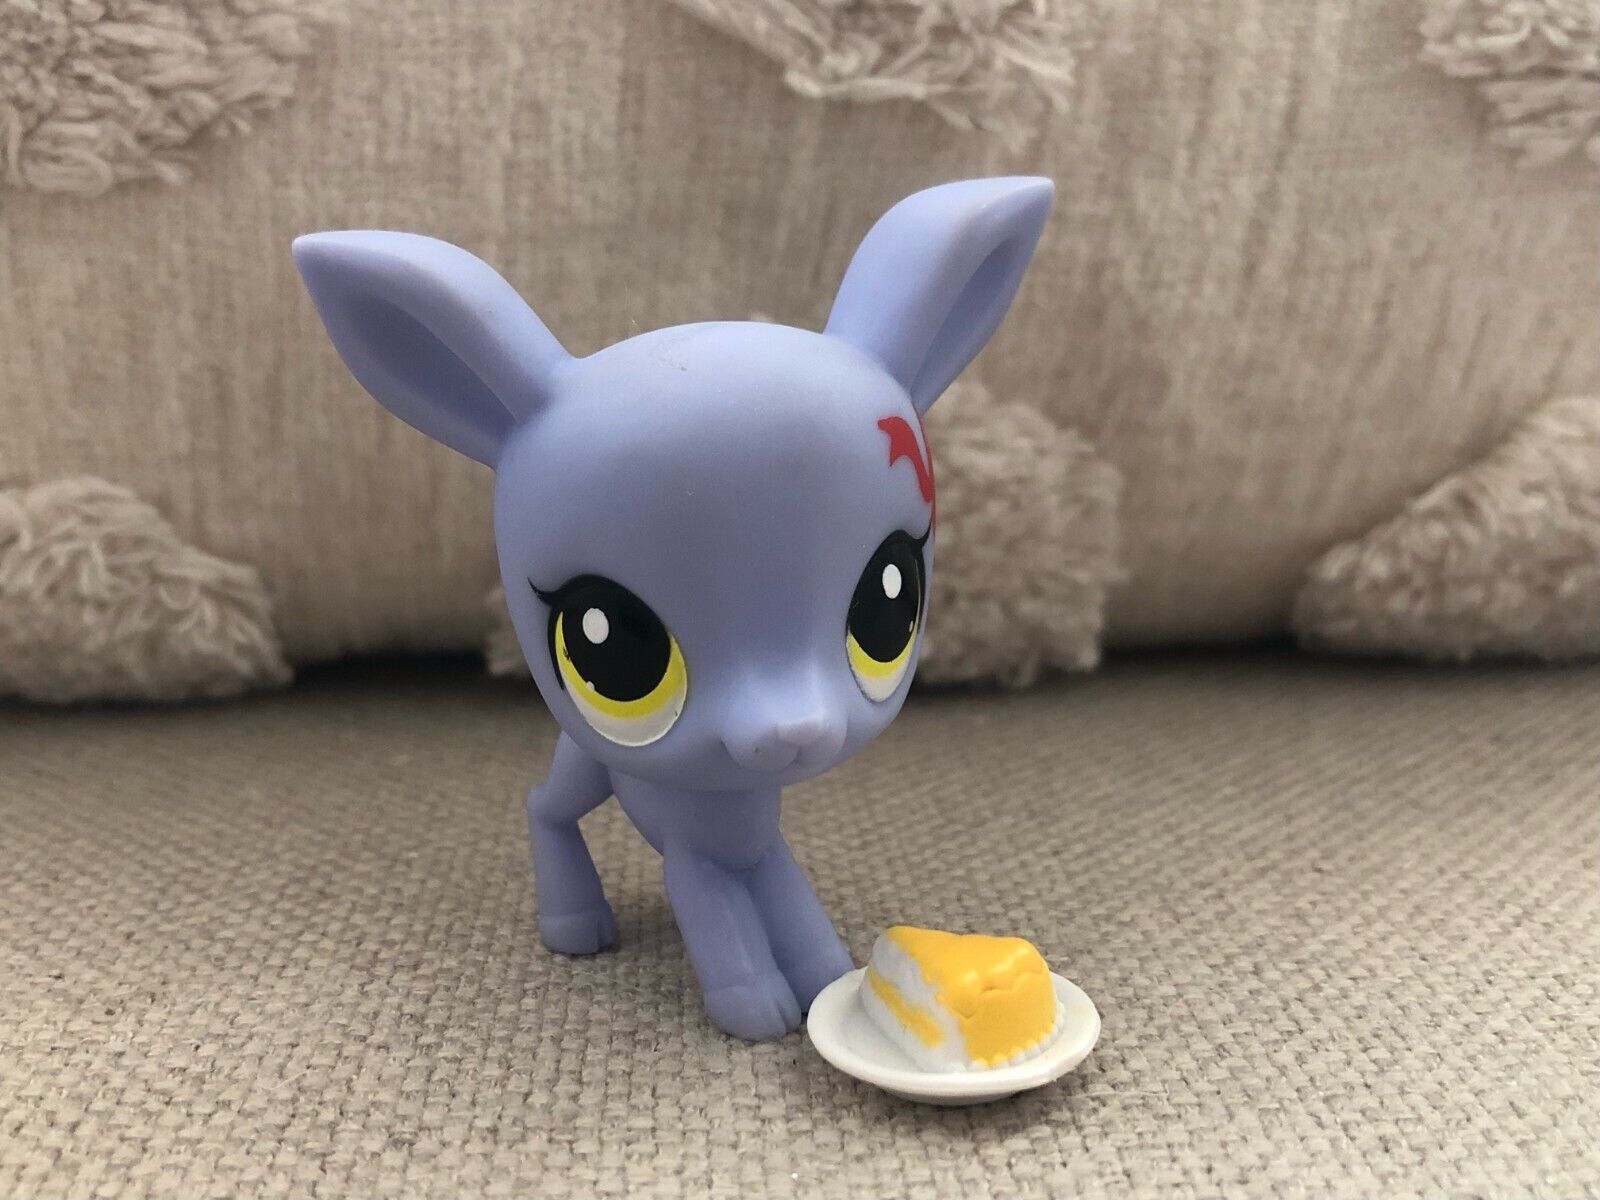 Littlest Pet Shop LPS - Deer #3534 - Blind Bags Party Stylin - Pie Included